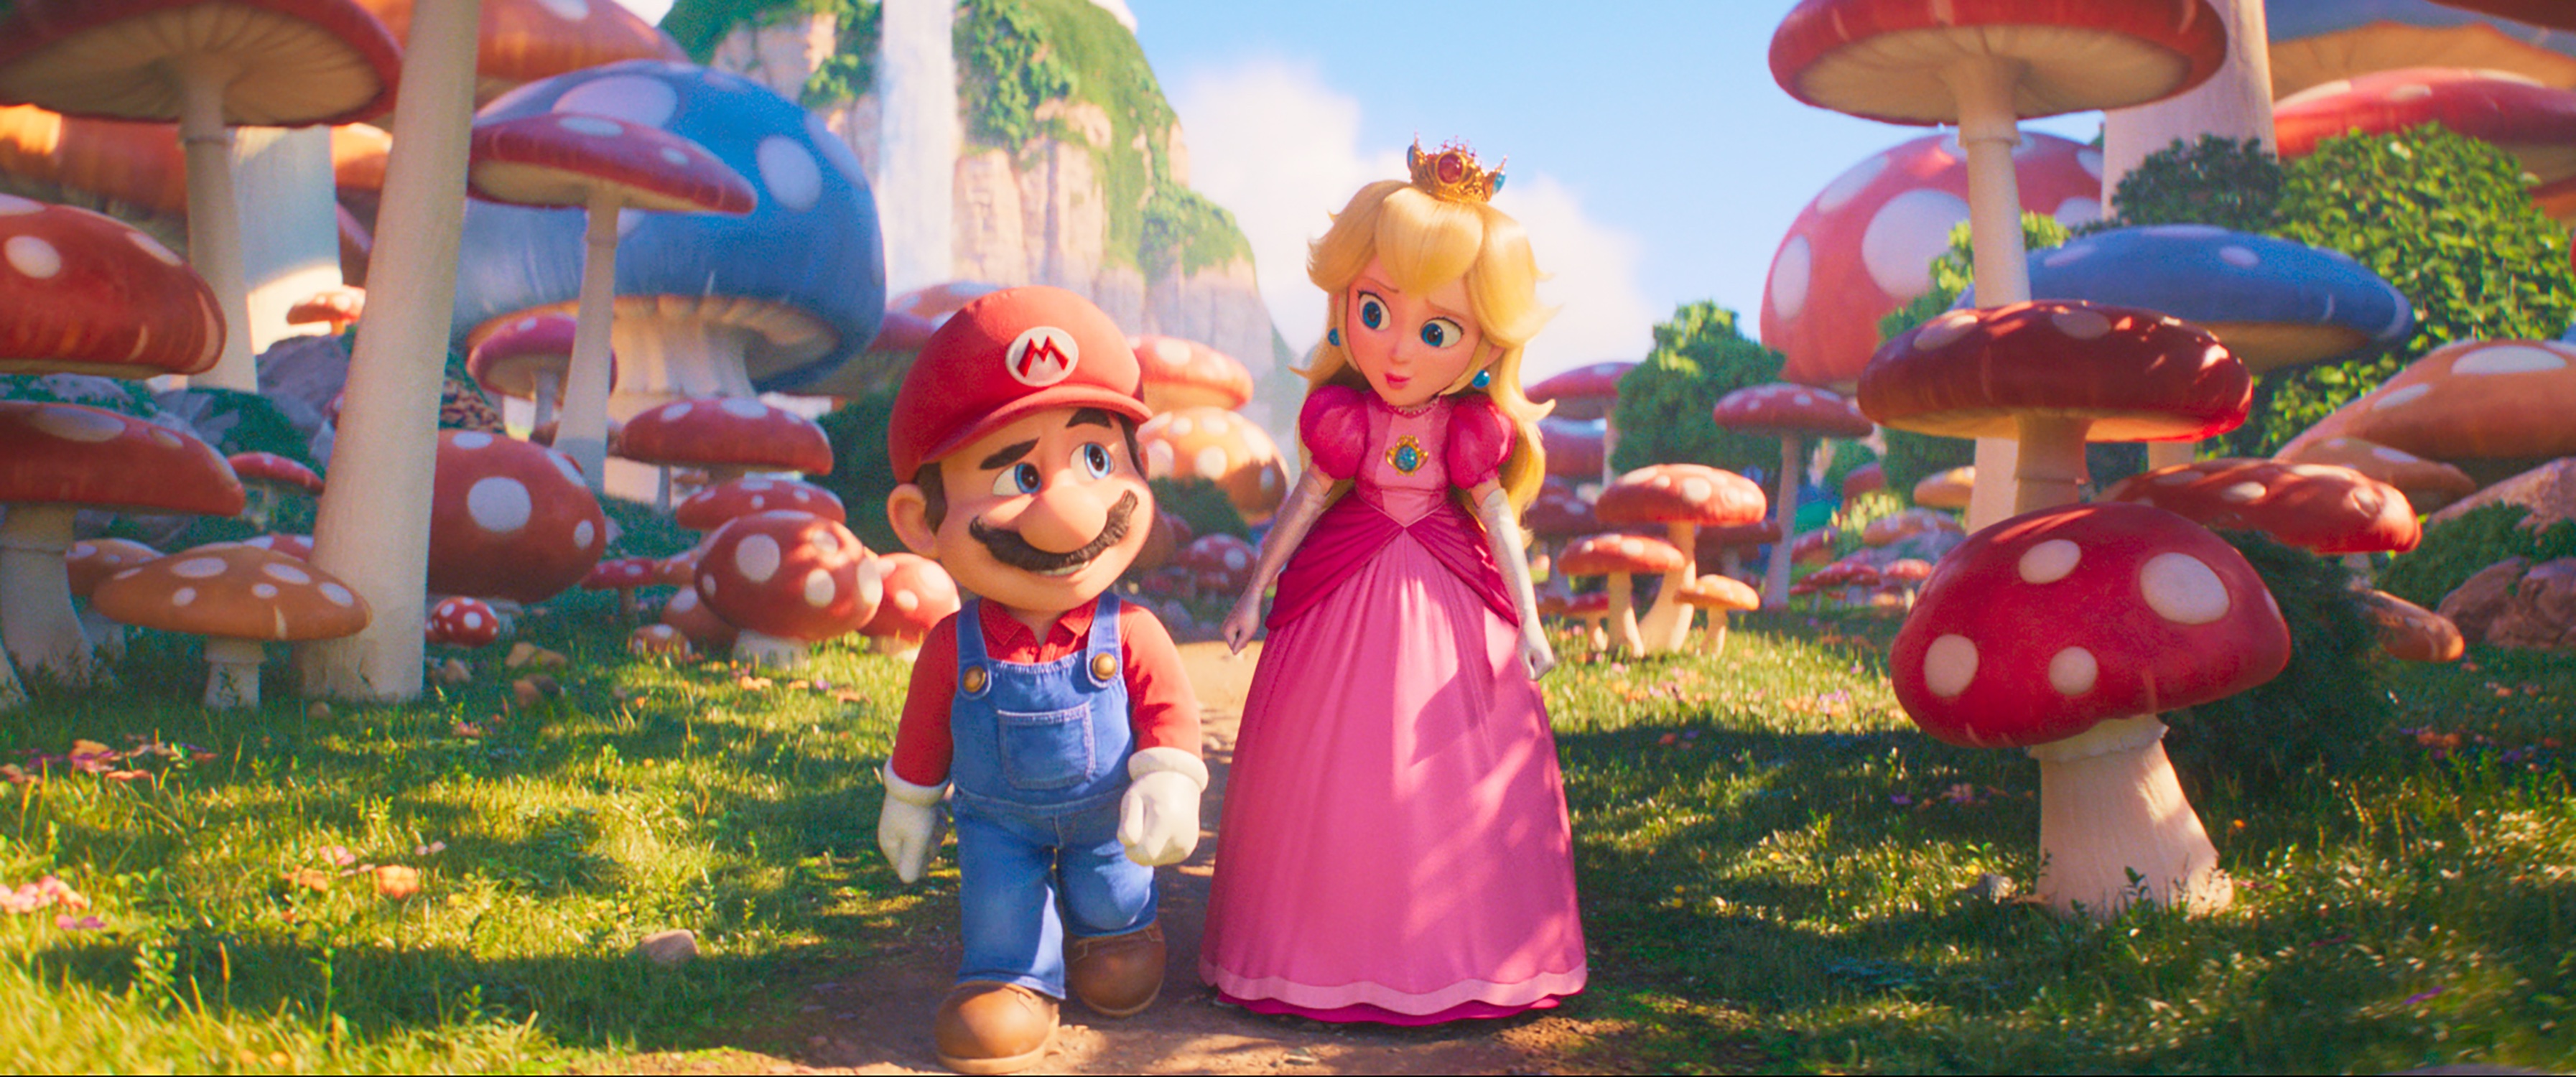 An image of Mario and Peach walking through a mushroom forest in the animated Mario movie. 